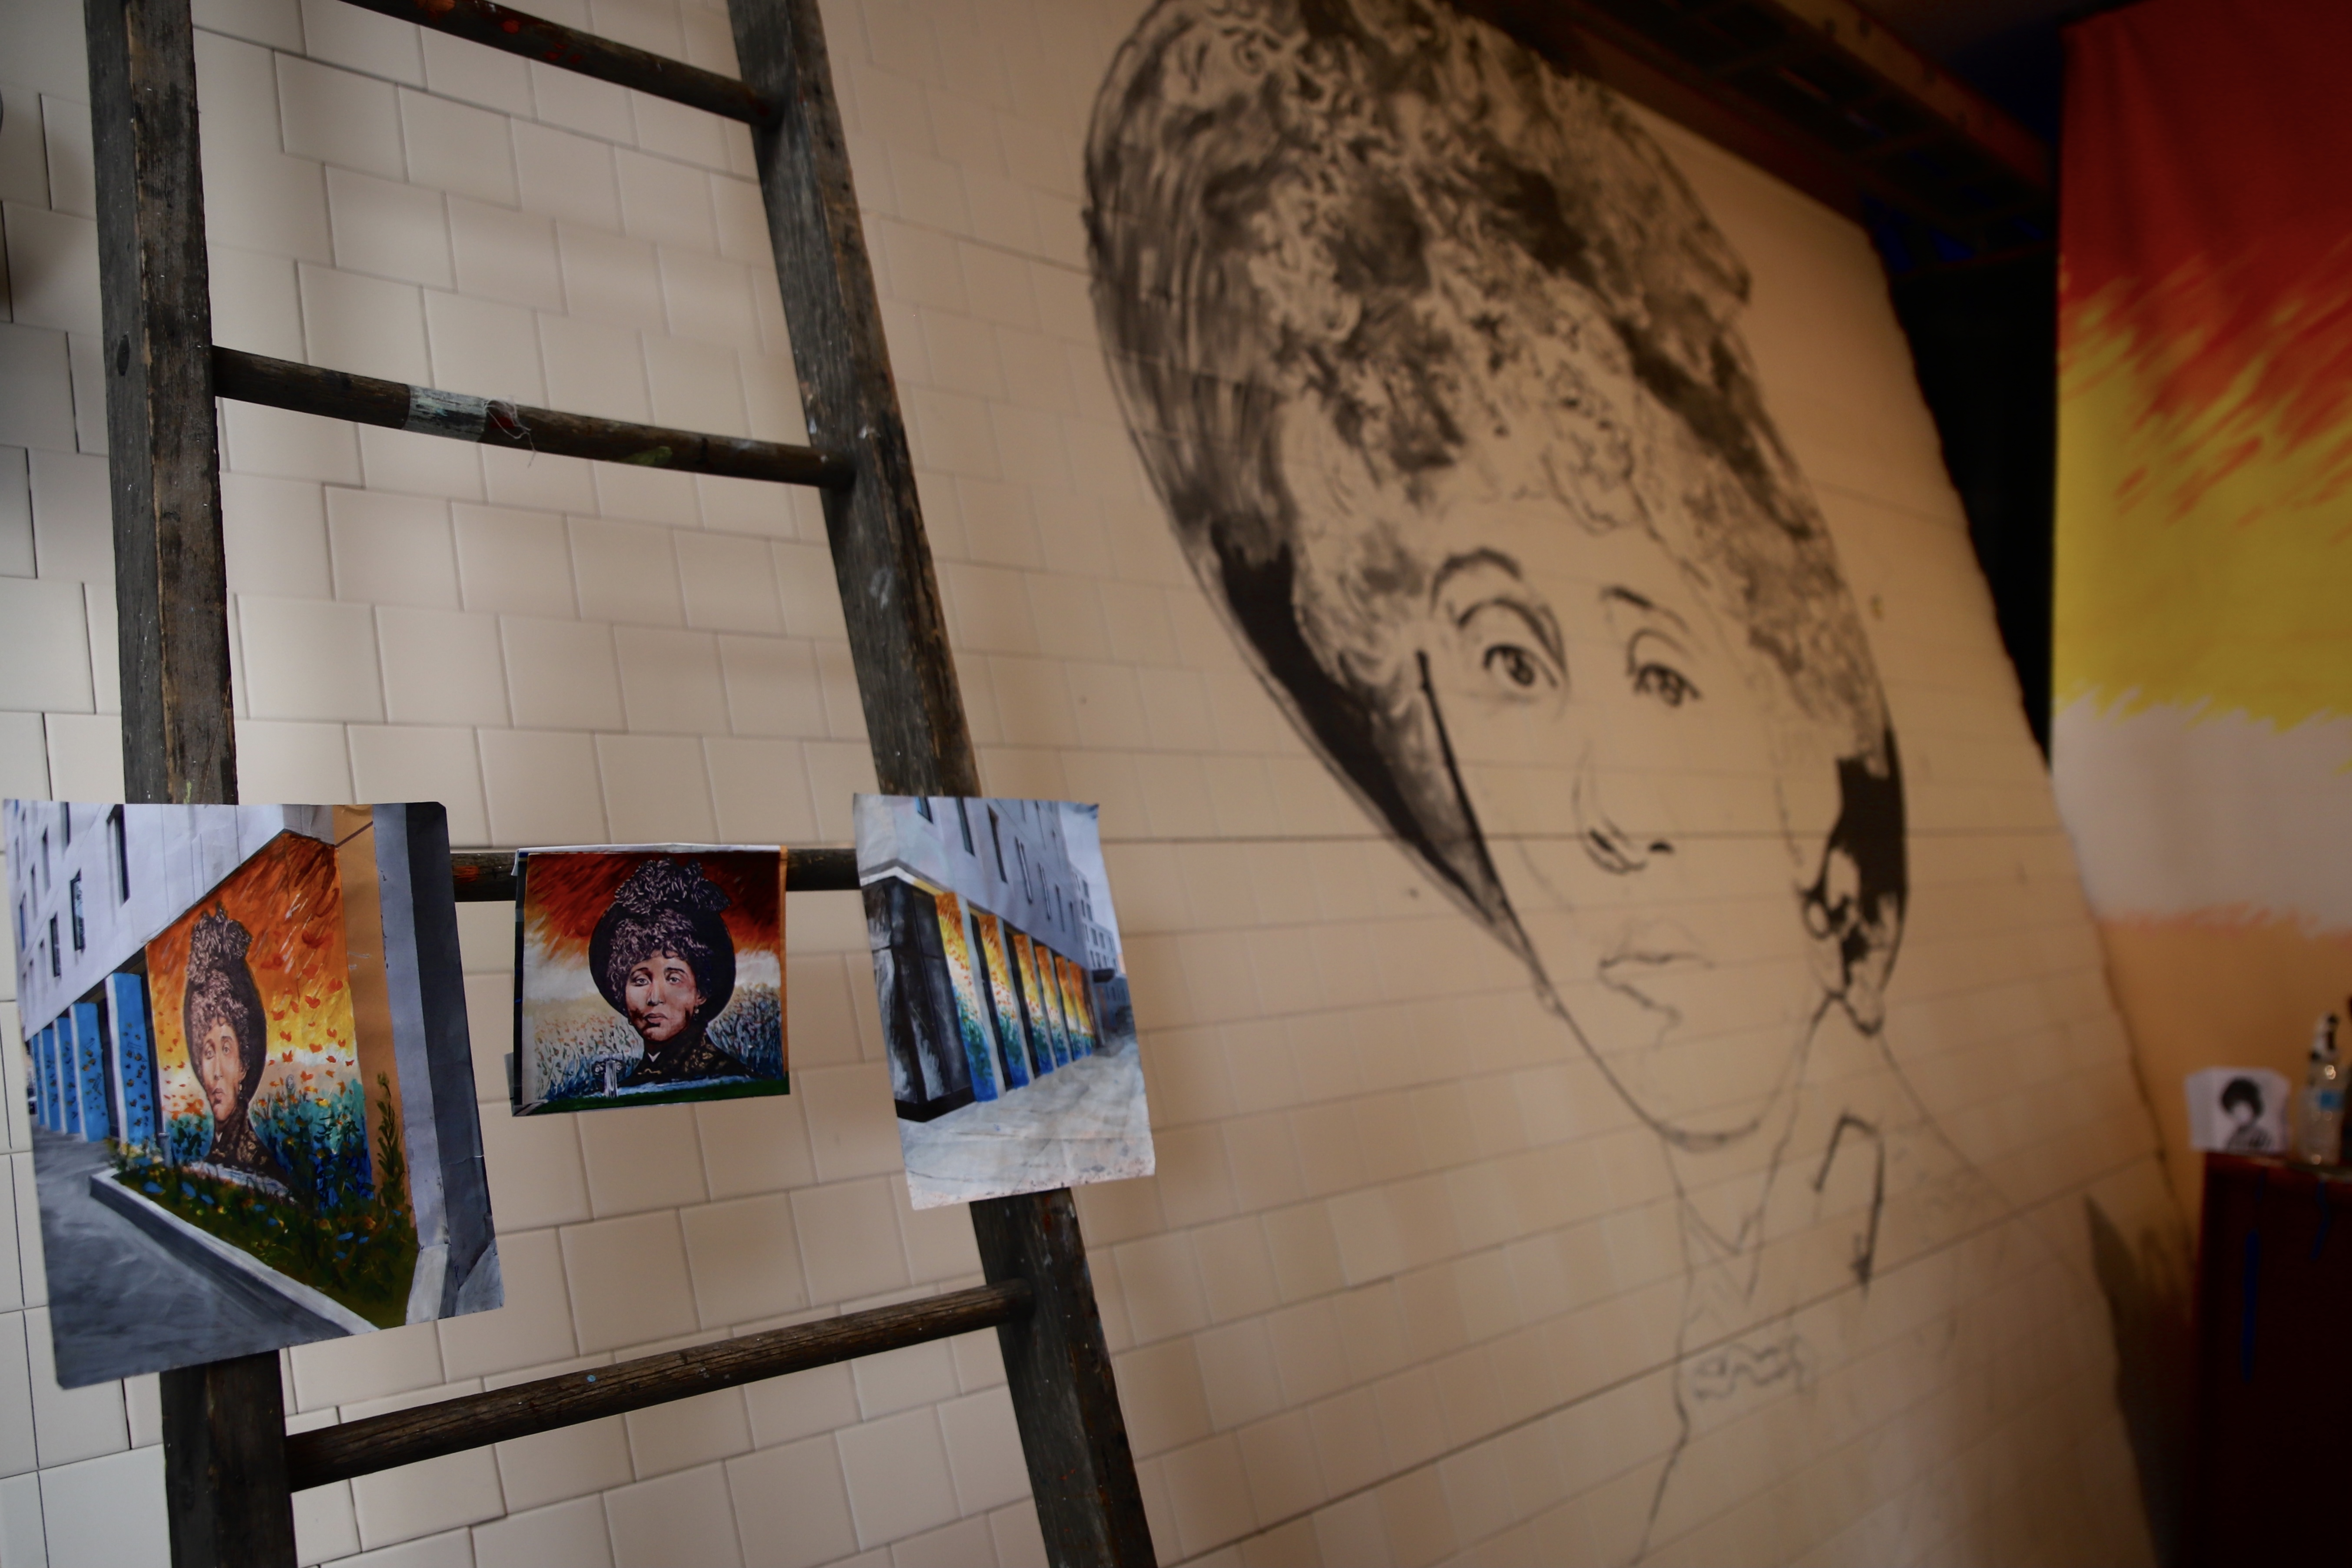 Duarte's in-progress project, "We Are Lucy" on display during Open House | photo by Jana Simovic